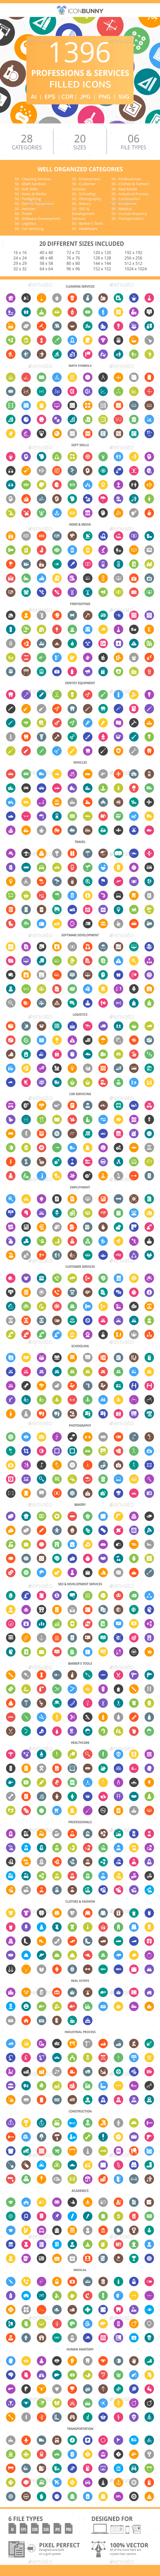 1396 Professions & Services Filled Round Icons